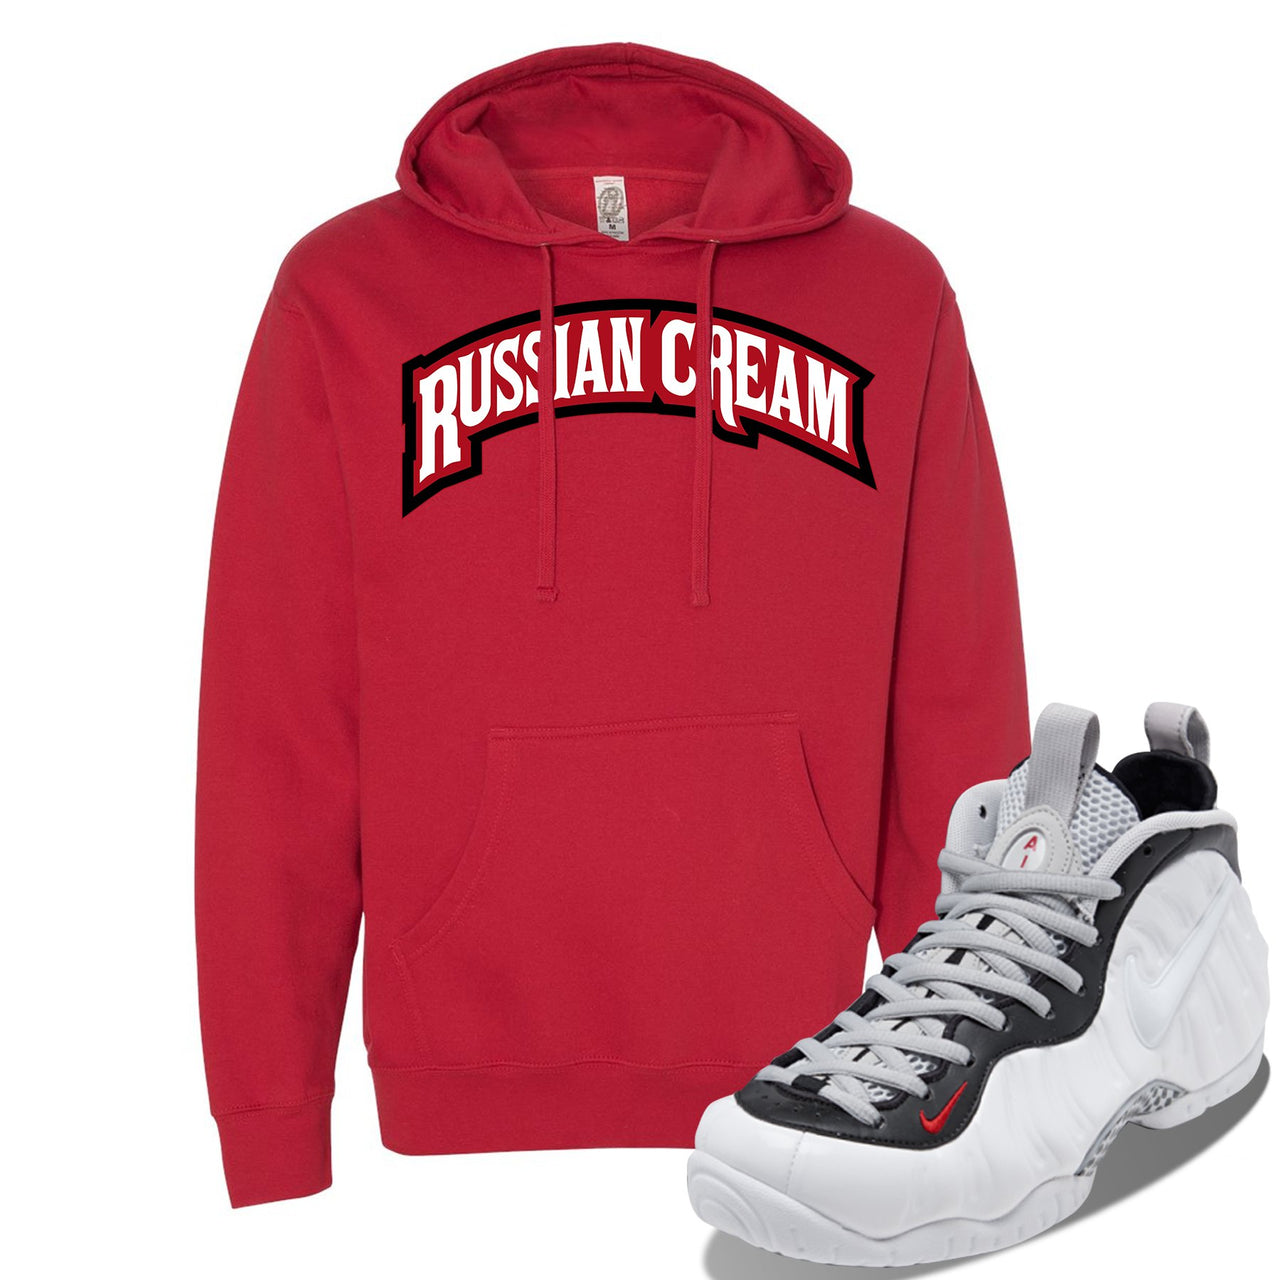 Foamposite Pro White Black University Red Sneaker Red Pullover Hoodie | Hoodie to match Nike Air Foamposite Pro White Black University Red Shoes | Russian Cream Arch